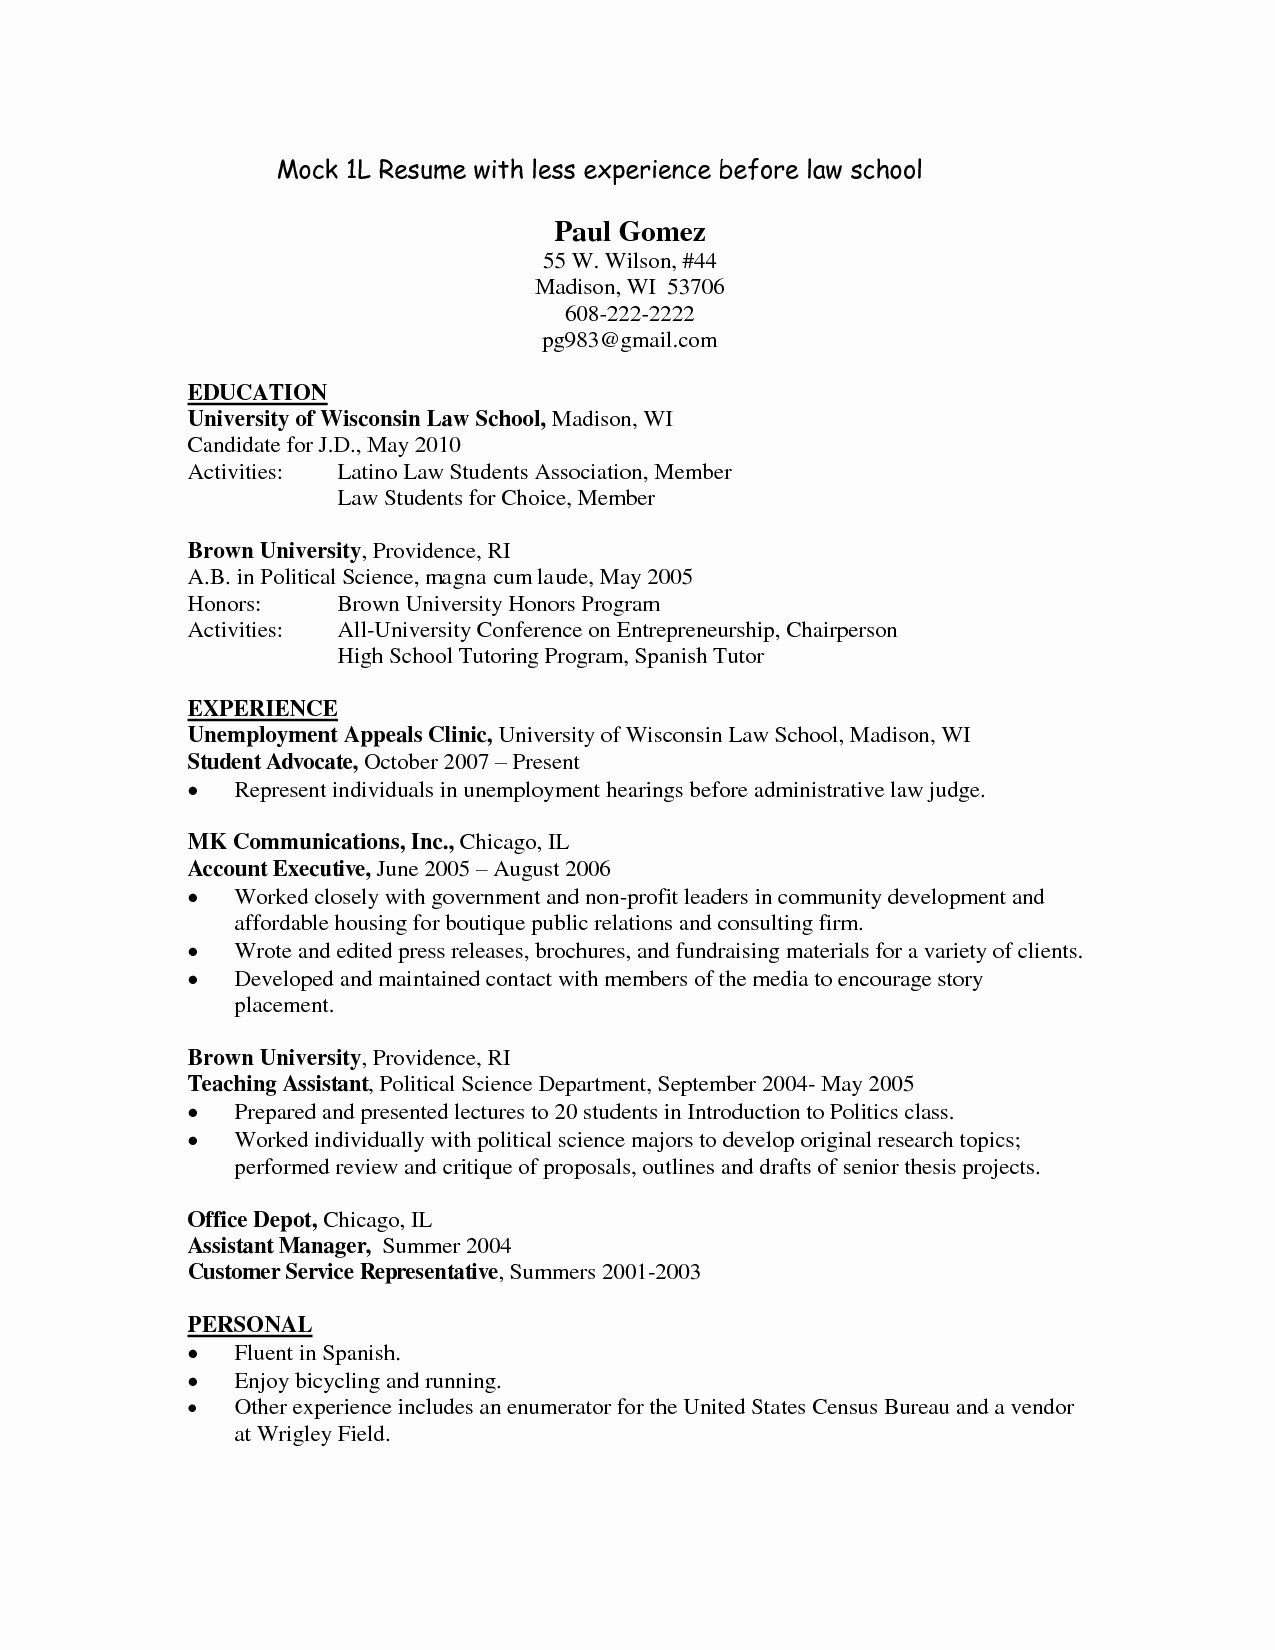 Yale Insurance In Chicago Luxury Sample Law School Cover Letter Document